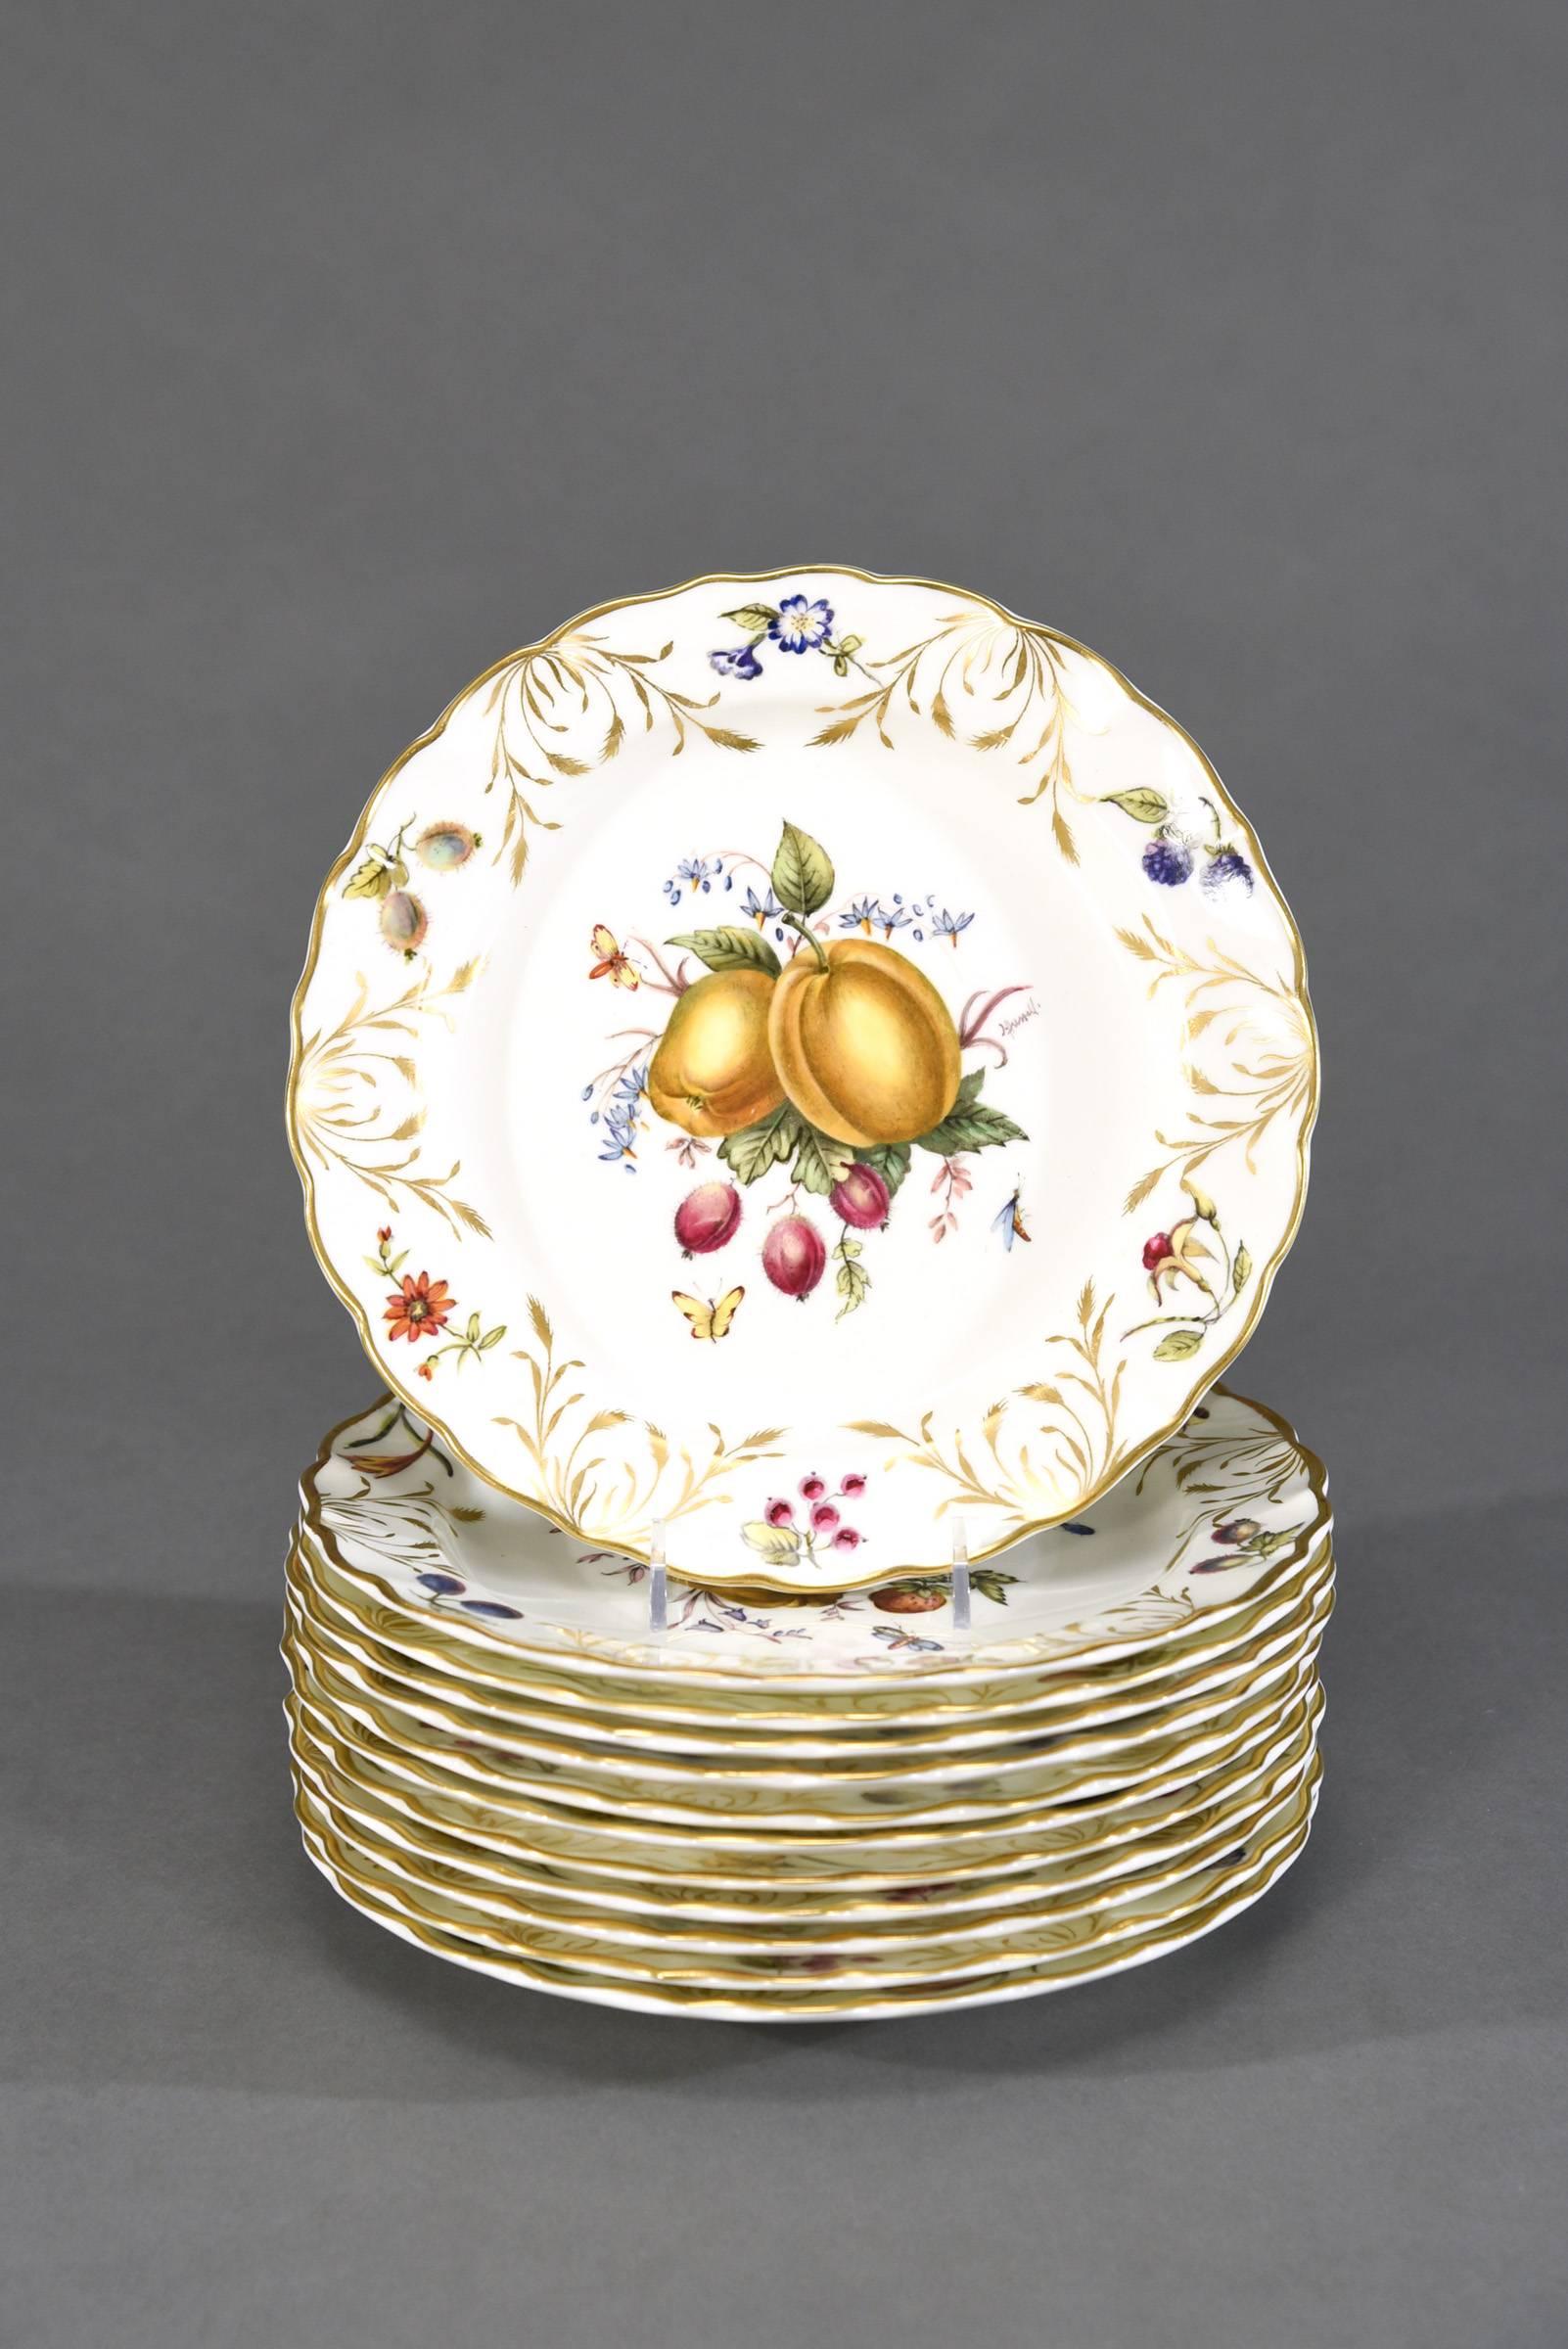 12 Royal Worcester Hand-Painted Dessert Plates with Fruit Artist Signed Hummel In Excellent Condition For Sale In Great Barrington, MA